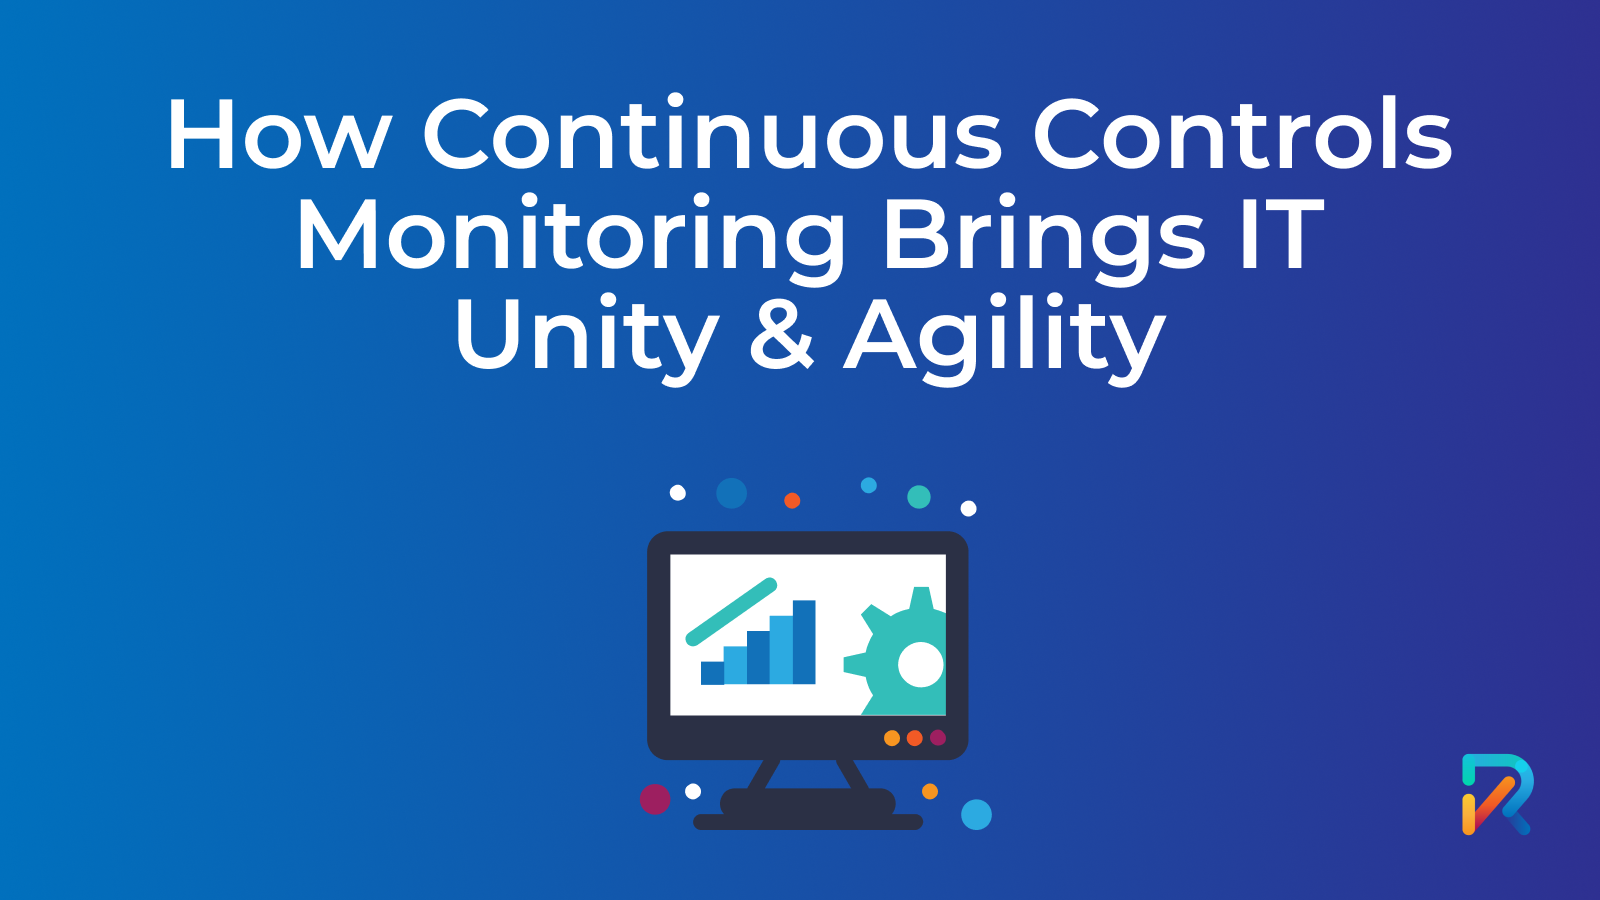 How Continuous Controls Monitoring Brings IT Unity & Agility